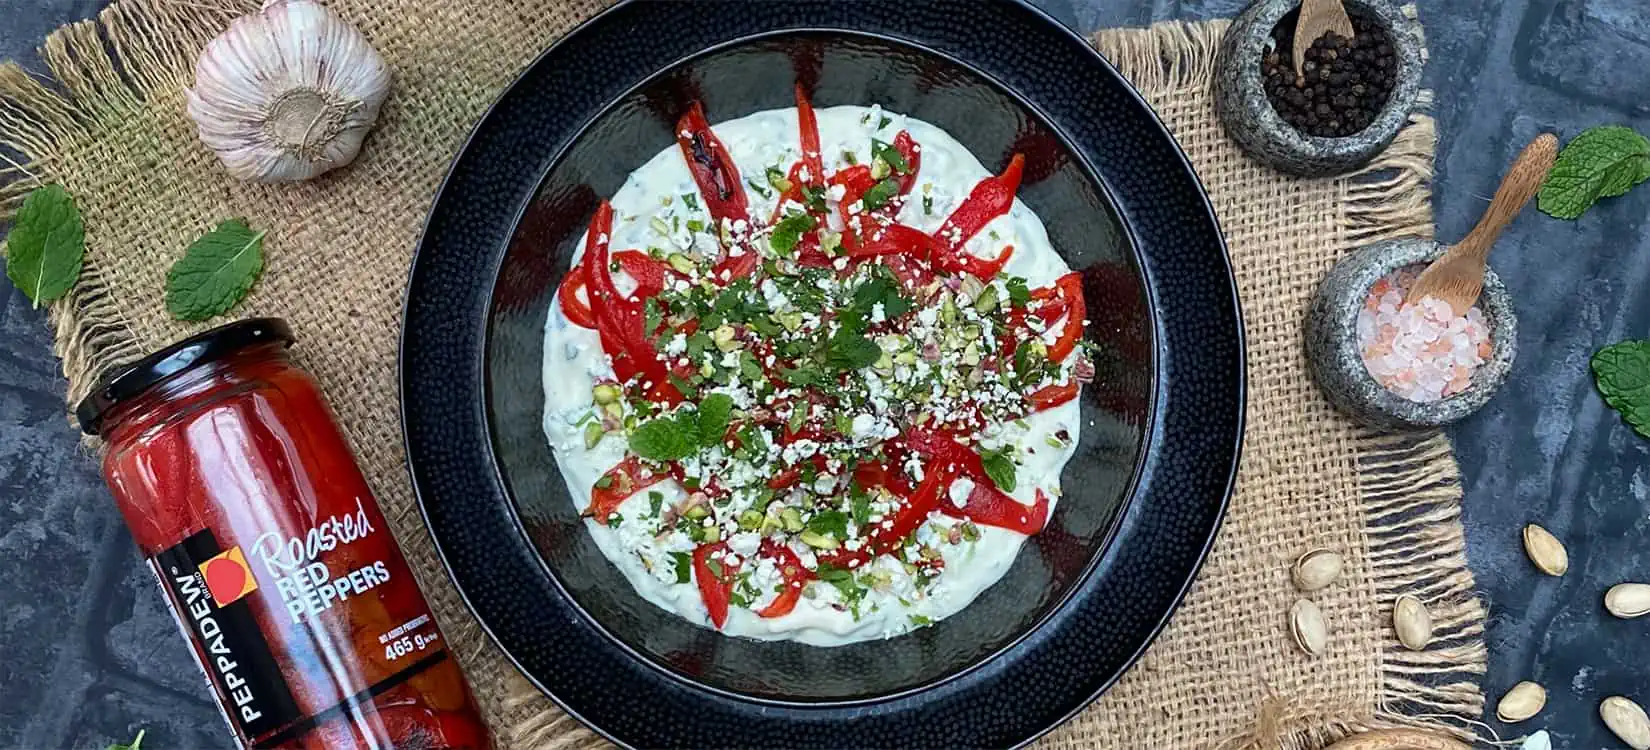 Tzatziki with Roasted Red Peppers and Crumble Topping